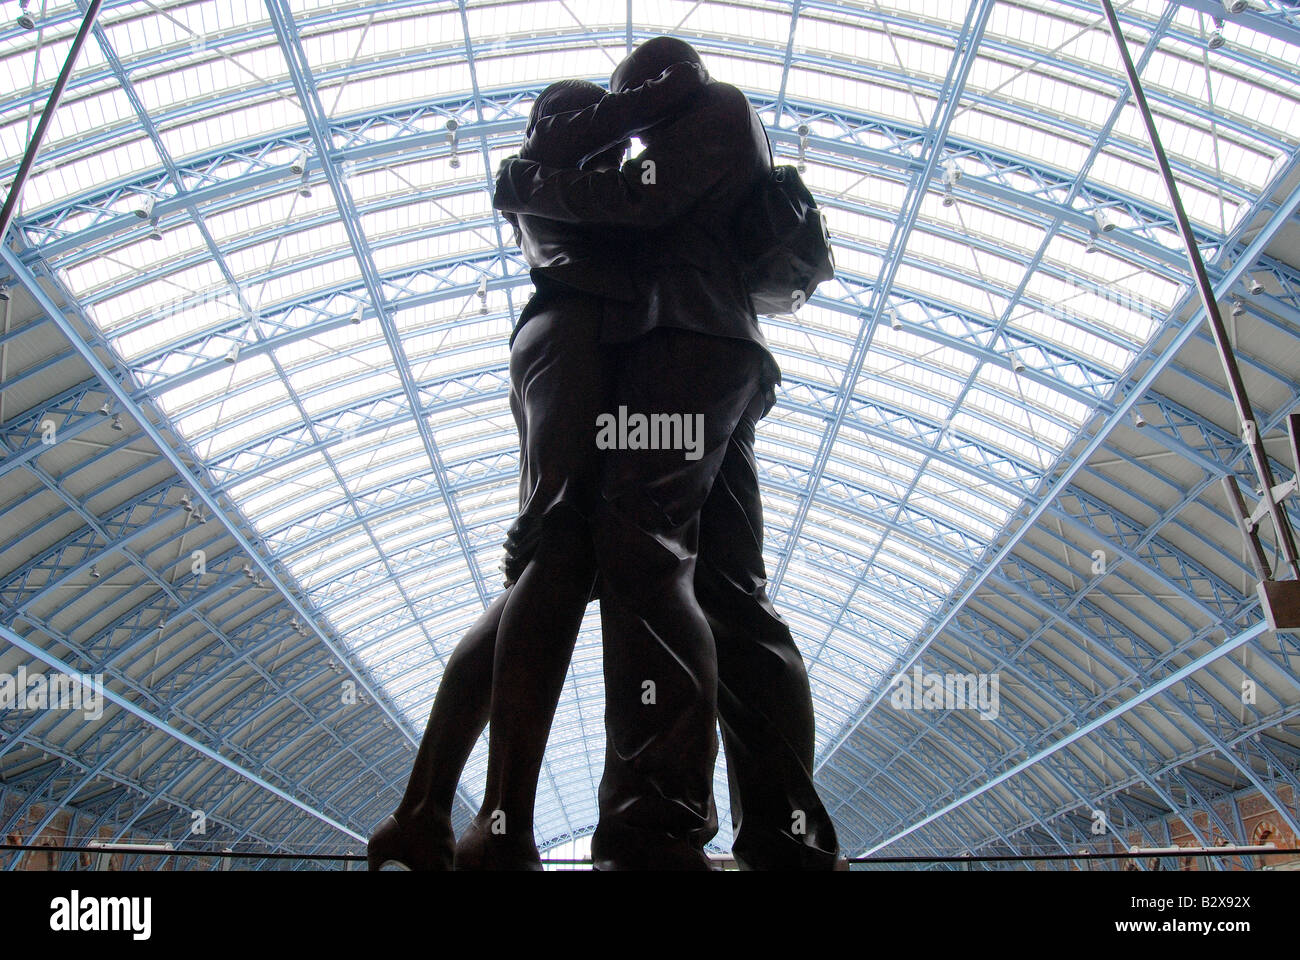 The Meeting Place Statue by Paul Day, St.Pancras International Station, Euston Road, Camden, London, England, United Kingdom Stock Photo